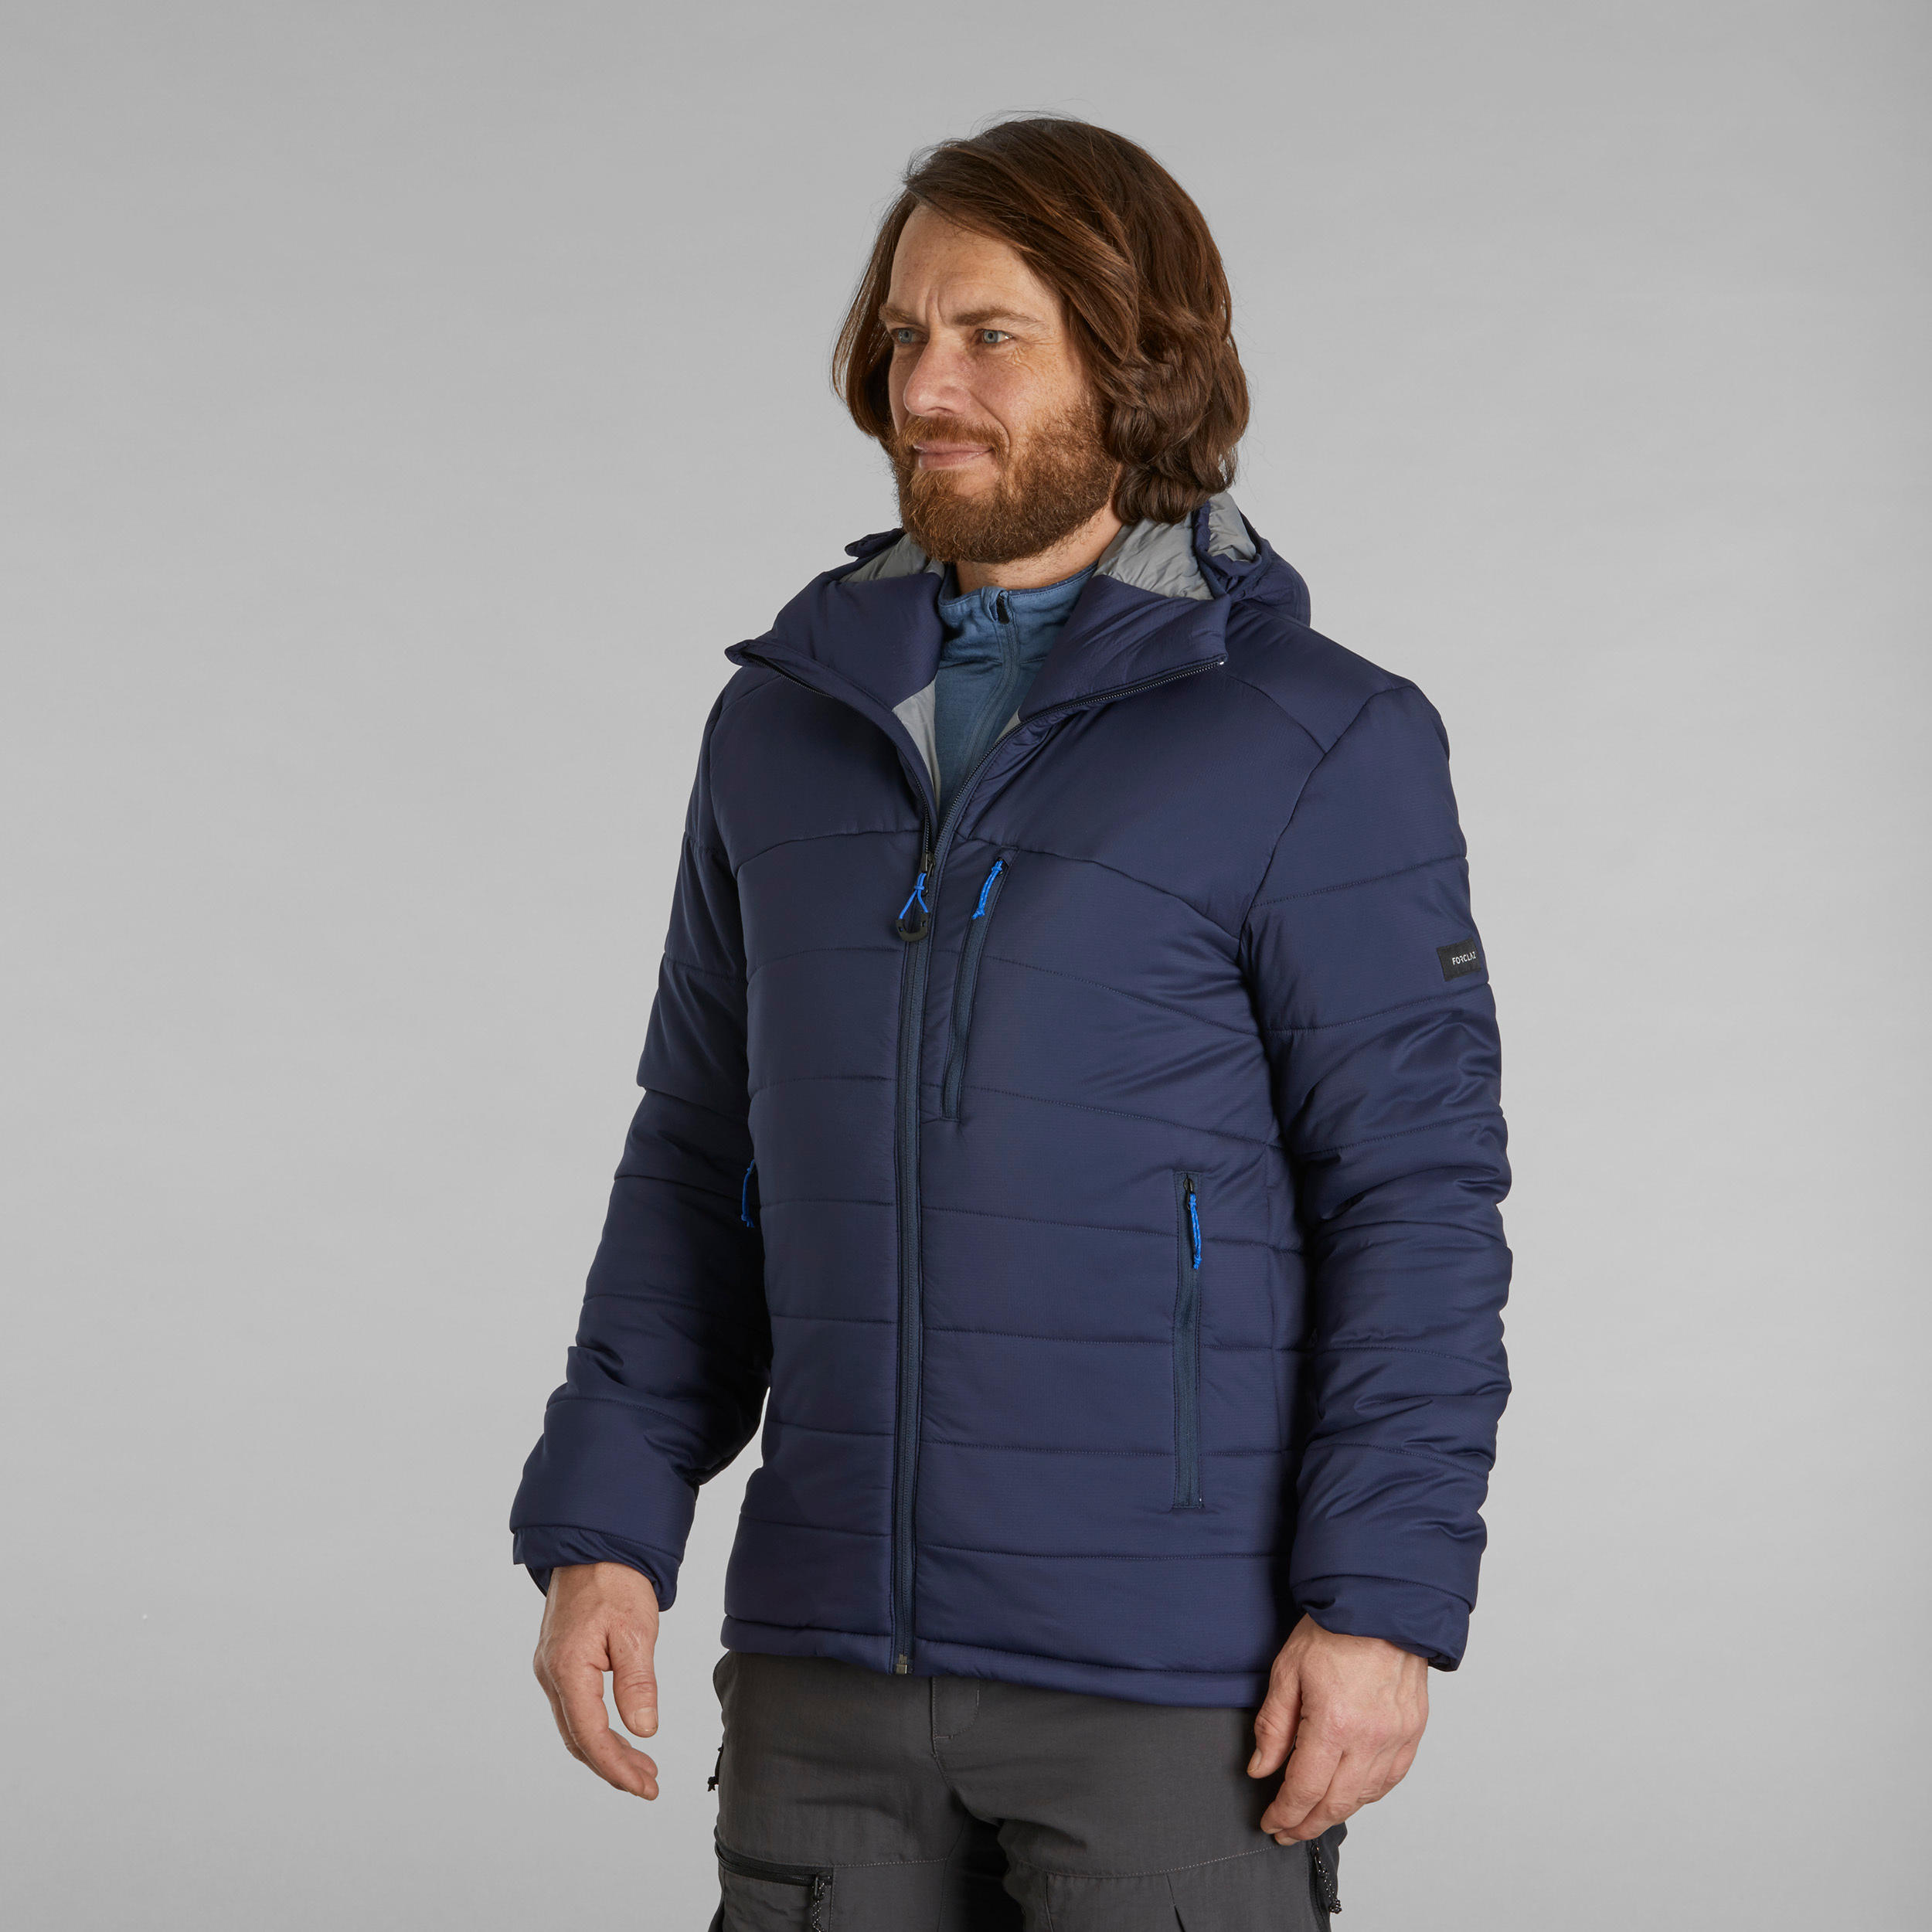 Our lightweight down jacket is... - Decathlon Sports India | Facebook